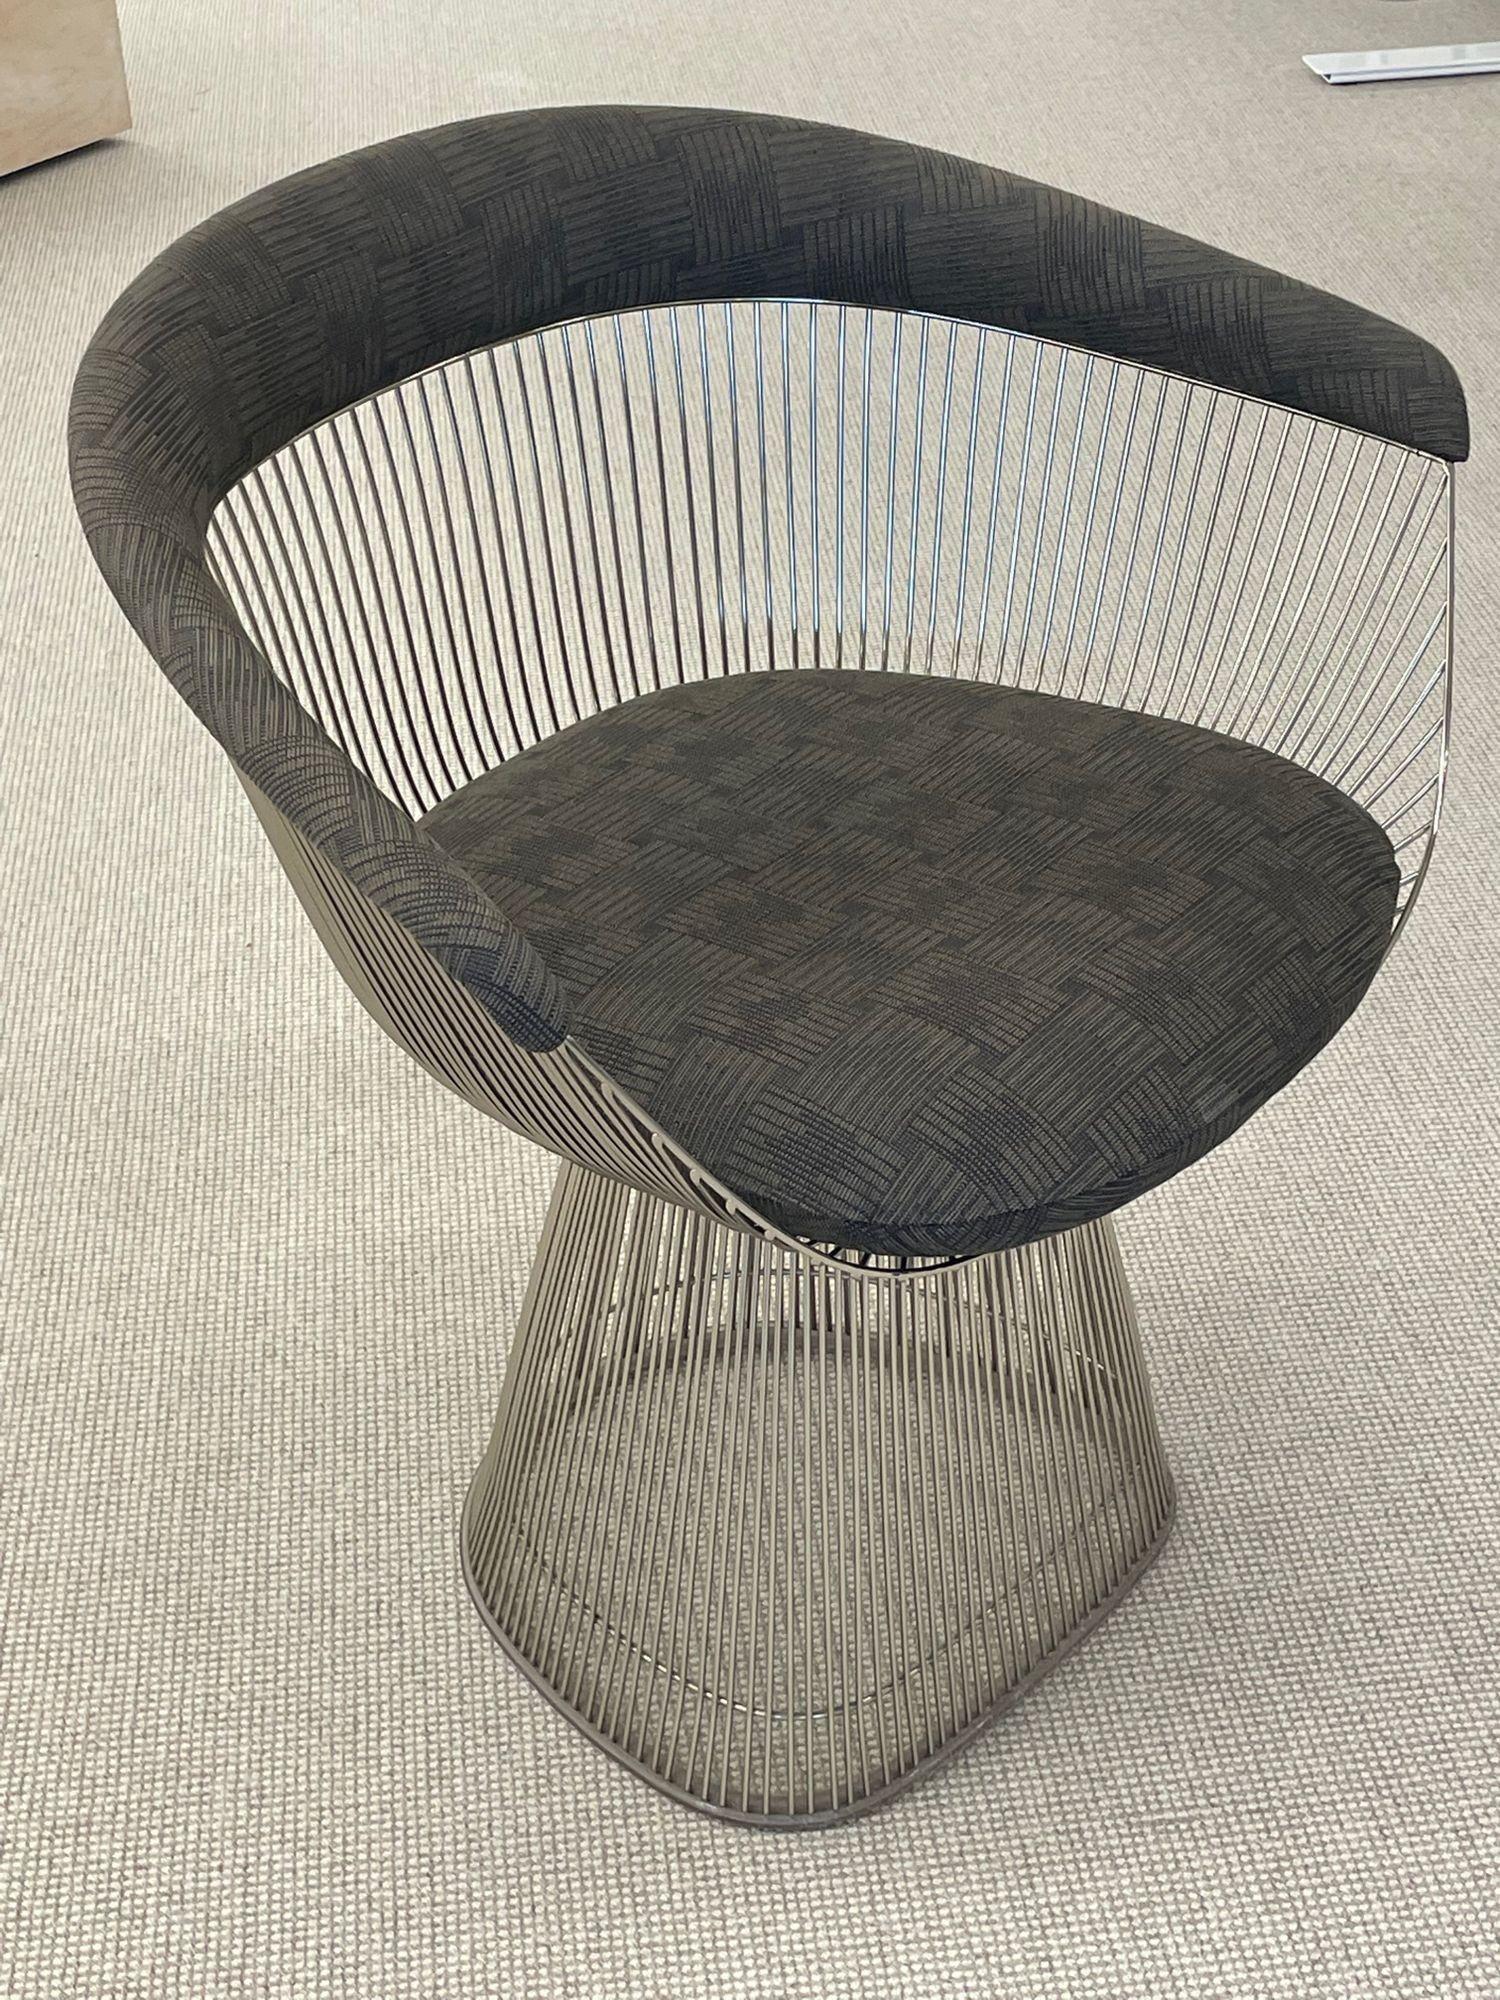 Vintage Pair of Warren Platner for Knoll Arm / lounge chairs, Signed, American
 
Pair of iconic mid-century lounge or arm chairs having a later abstract grey upholstery and the original Knoll labeling on it's underside. Matching circular dining